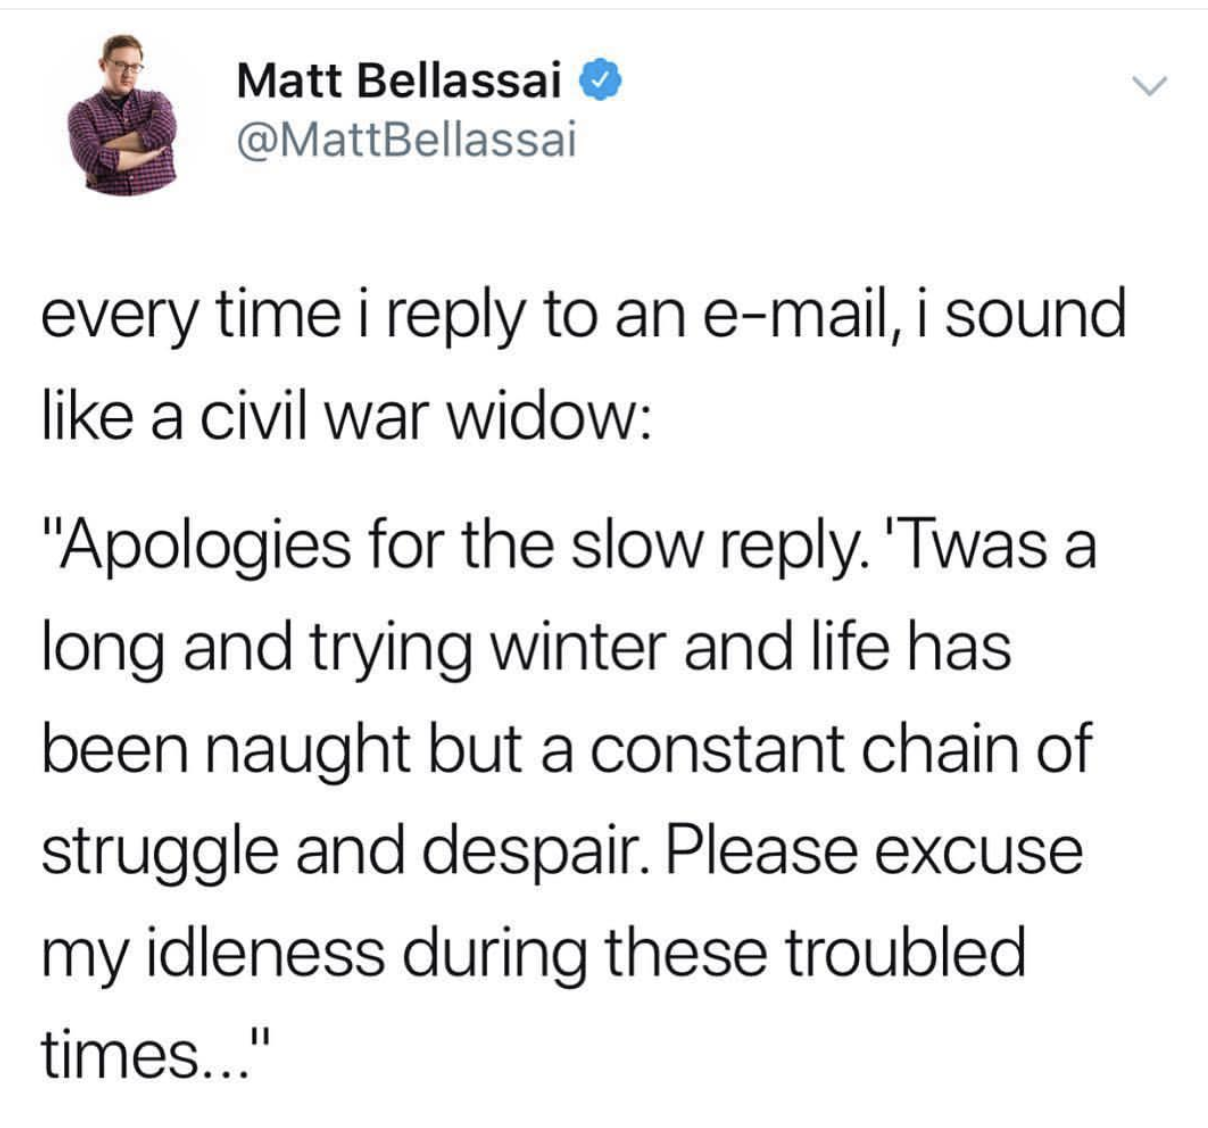 reddit relationship memes - Matt Bellassai every time i to an email, i sound a civil war widow "Apologies for the slow . 'Twas a long and trying winter and life has been naught but a constant chain of struggle and despair. Please excuse my idleness during